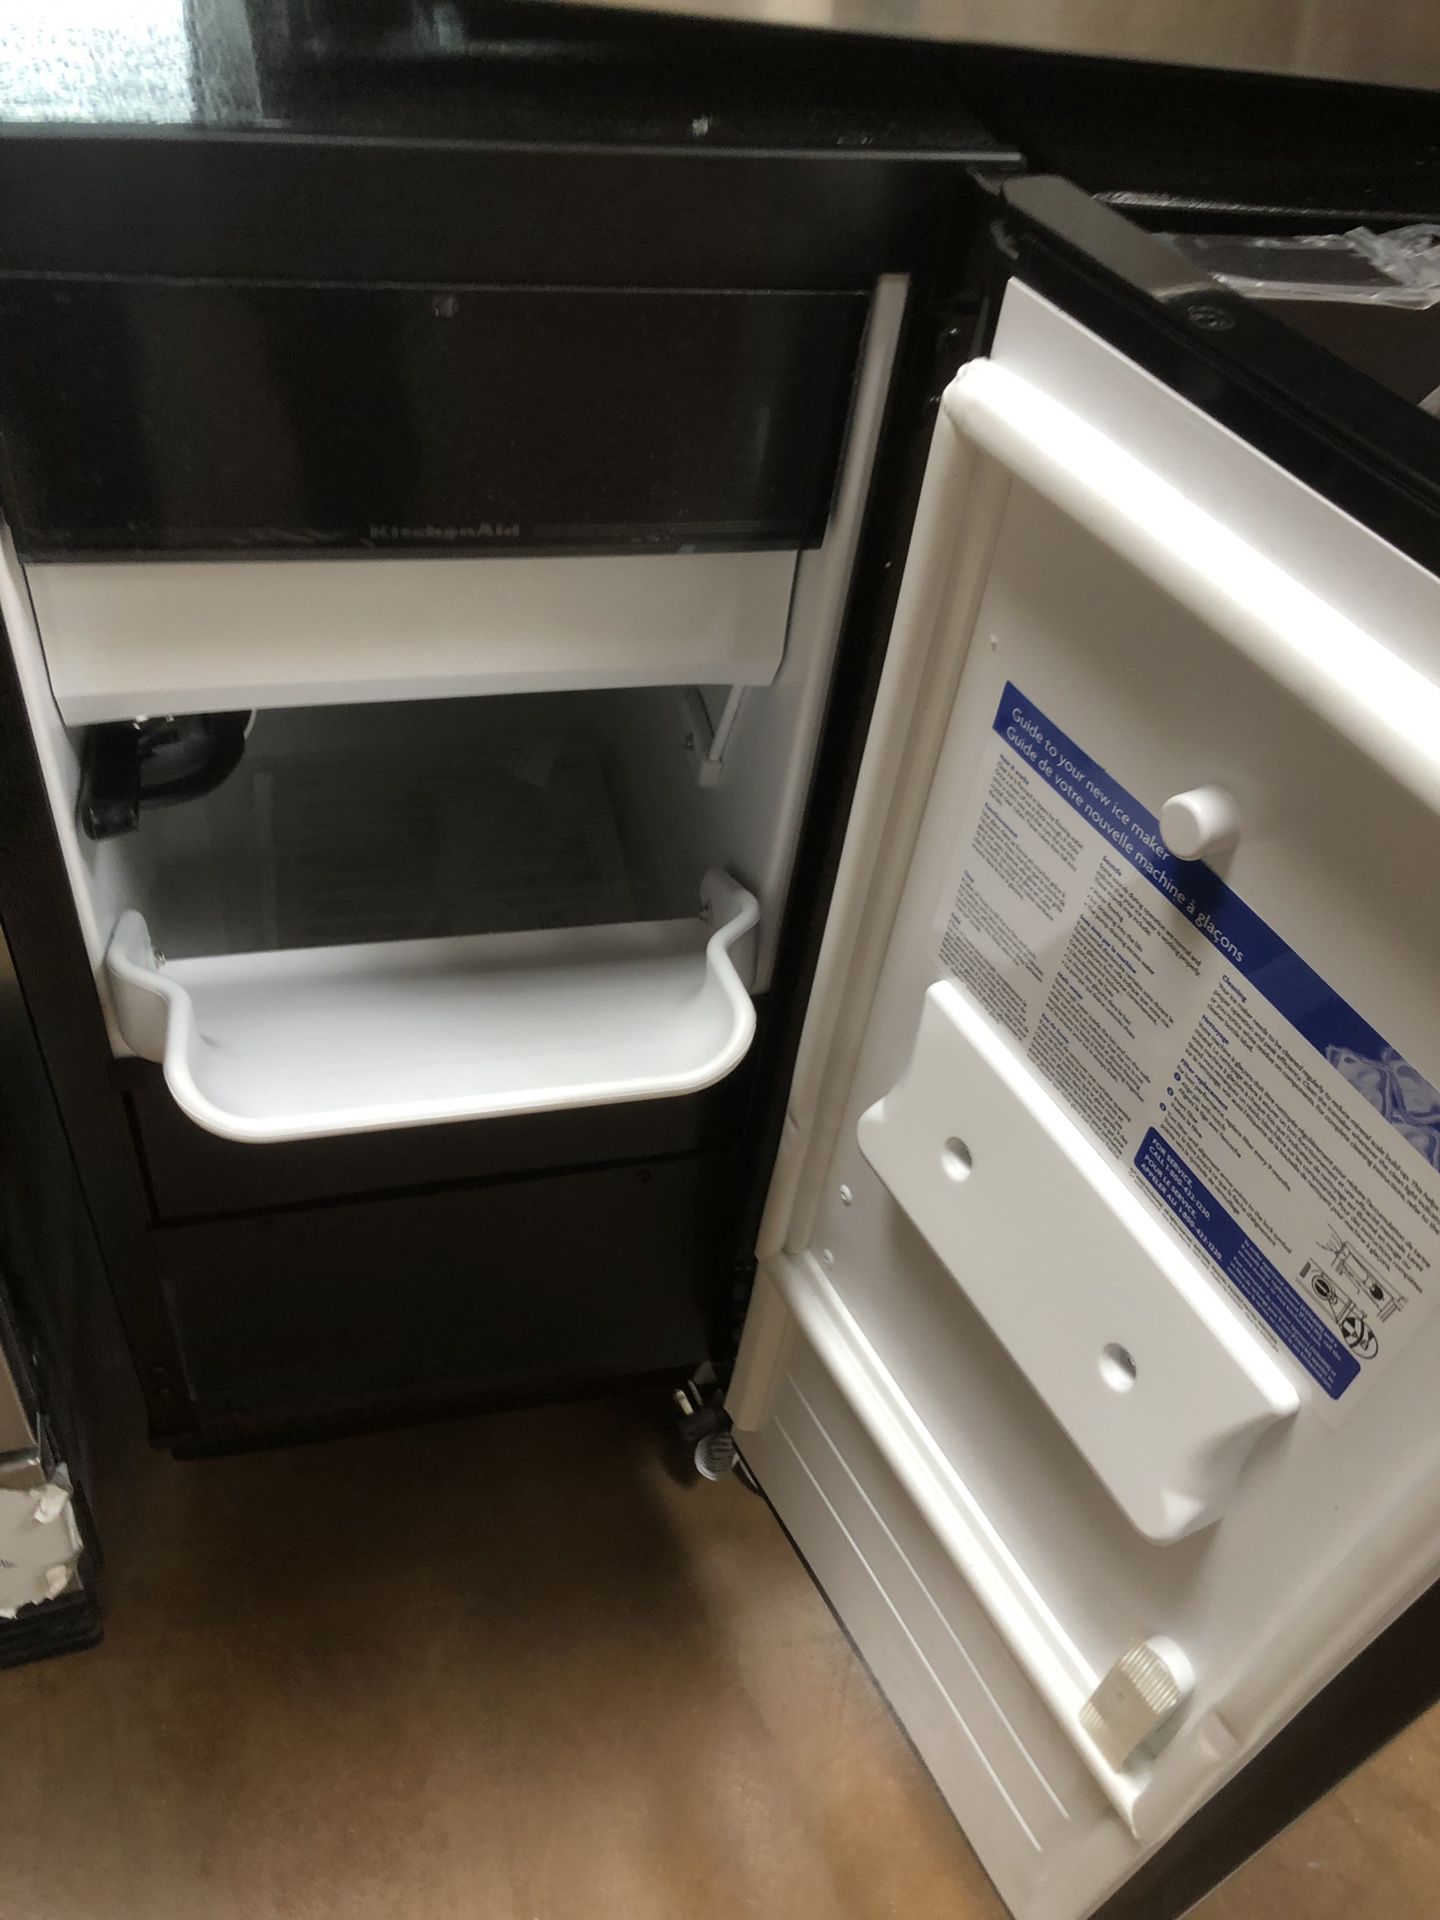 KitchenAid Ice Maker 18 Inch Wide Stainless Steel for Sale in Glendora, CA  - OfferUp